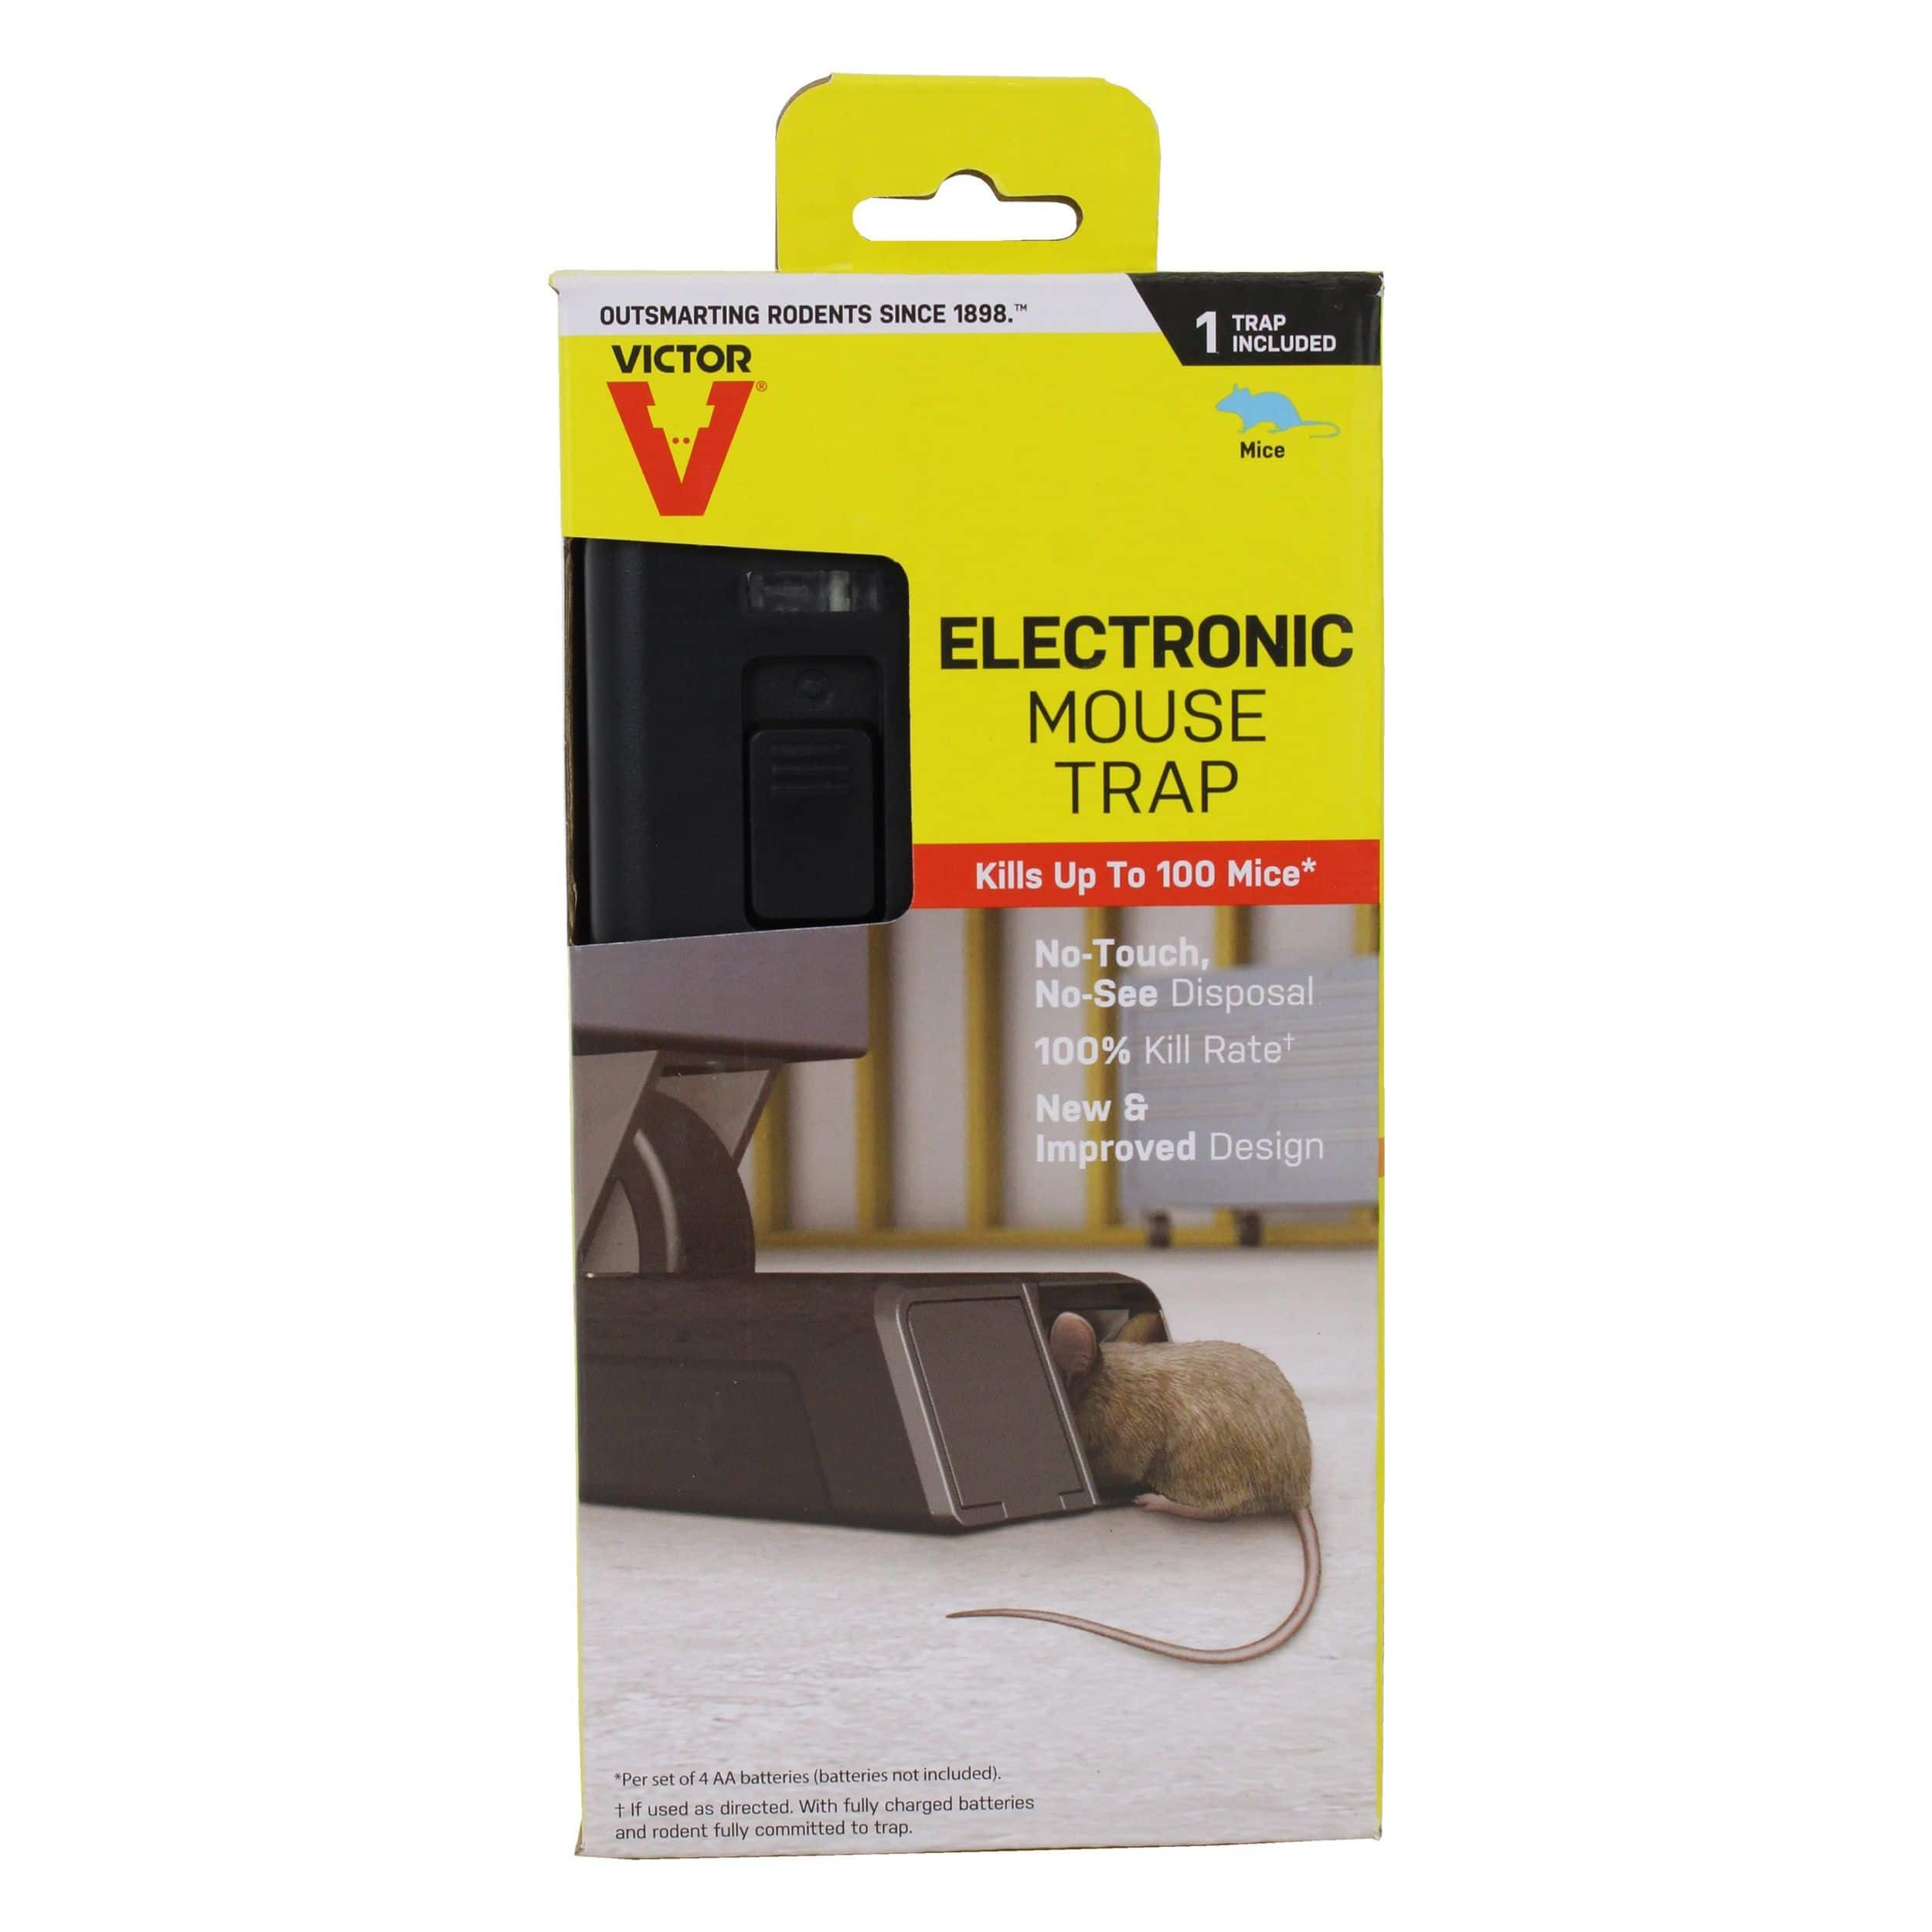 https://media-www.canadiantire.ca/product/seasonal-gardening/gardening/weed-insect-rodent-control/0591931/victor-electronic-mouse-trap-830063e5-e71f-45af-abec-2f48875c0c72-jpgrendition.jpg